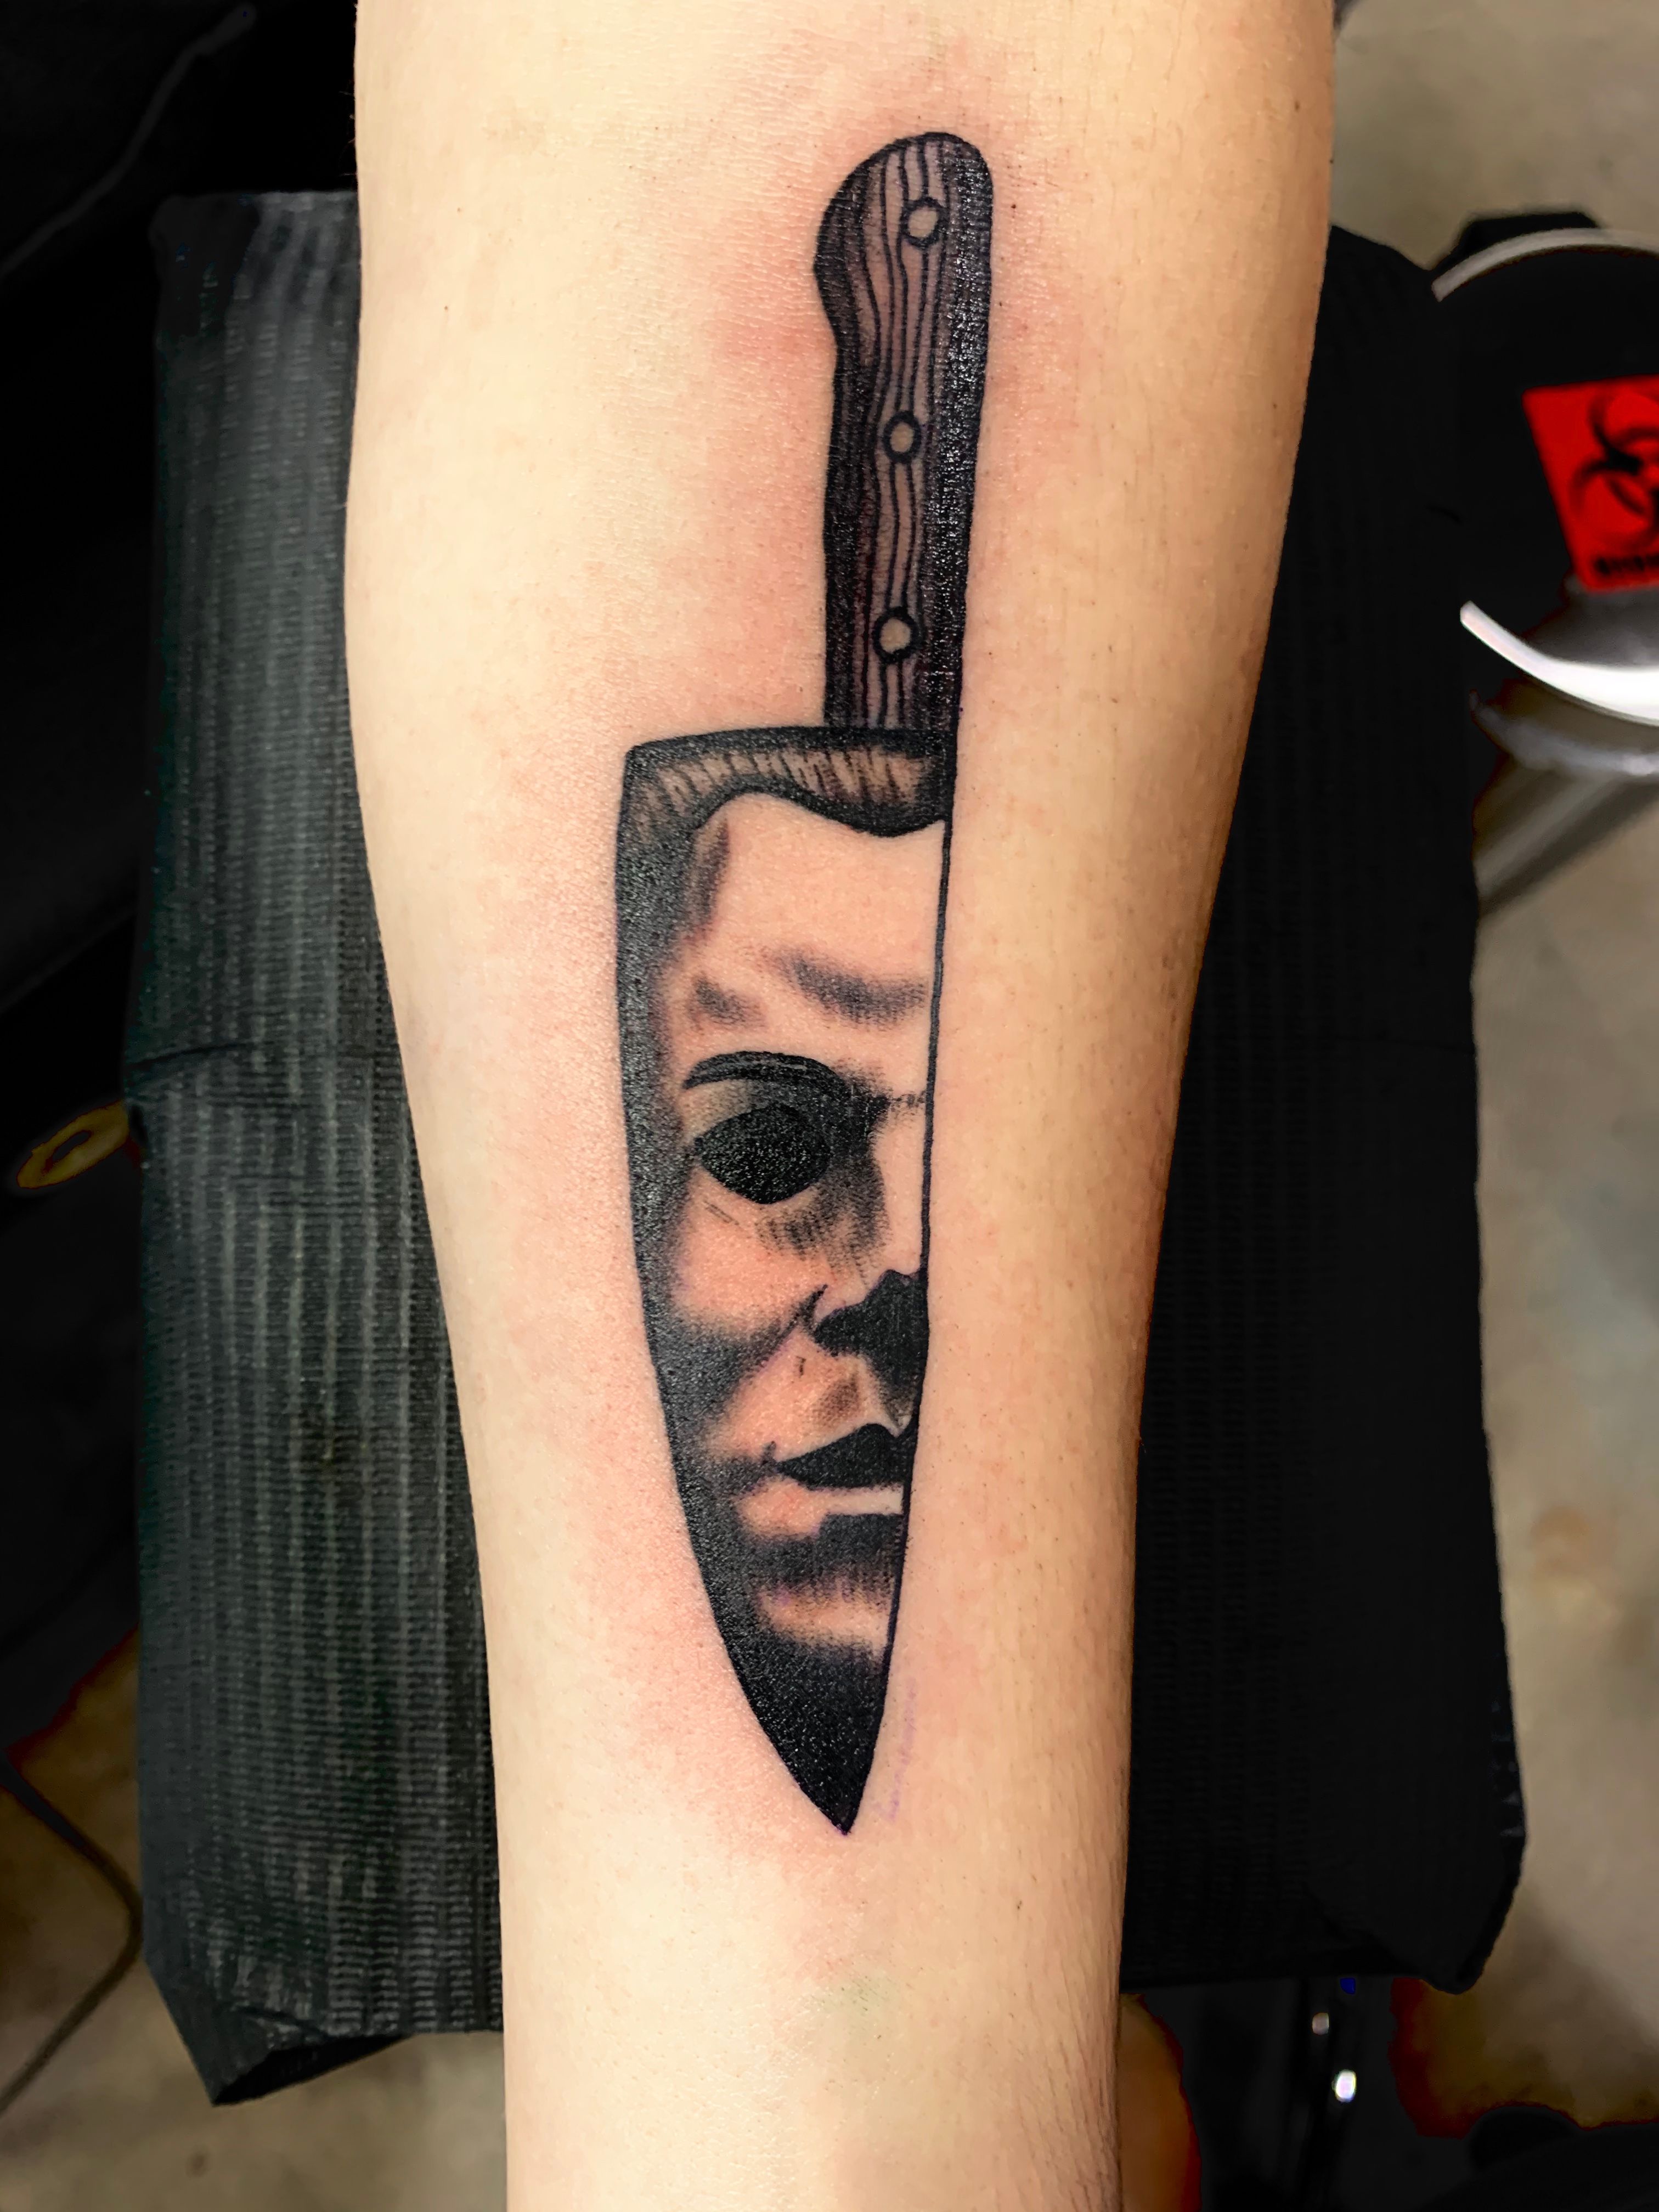 michael myers tattoo by PROWLER3775 on DeviantArt